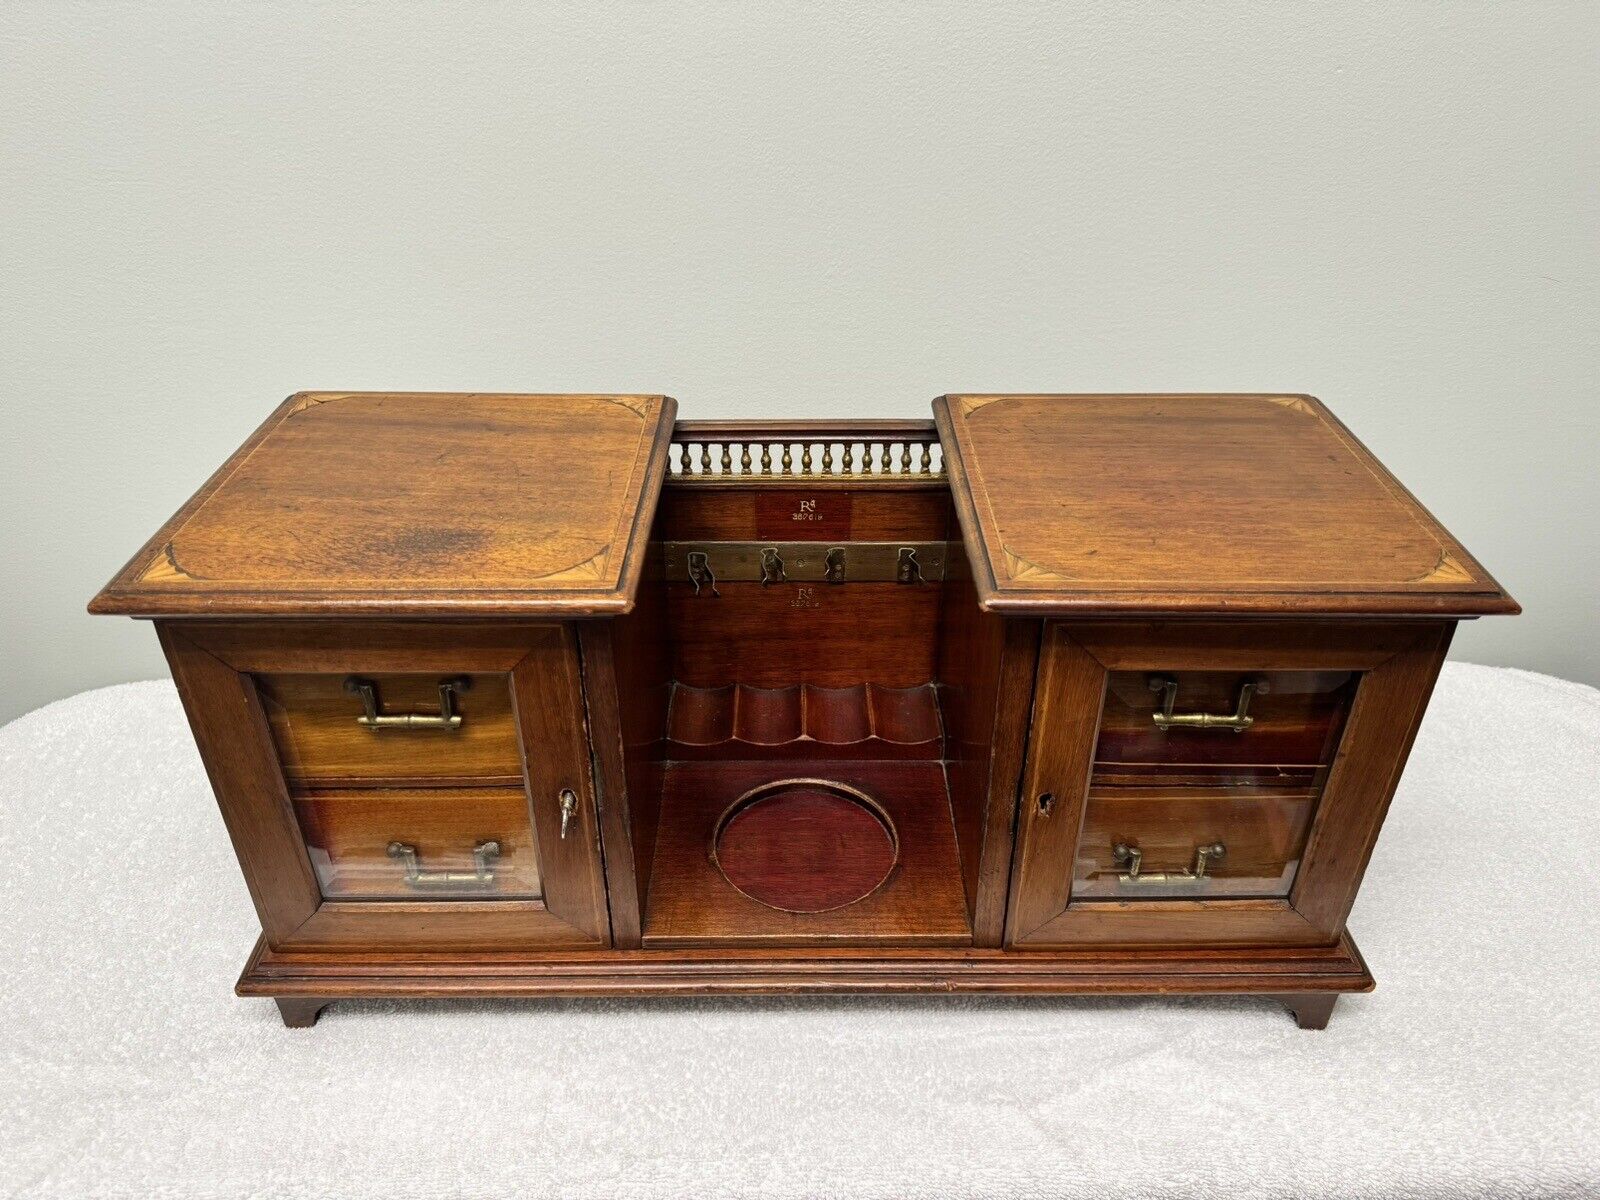 Antique Pipe And Tobacco Storage/Display Chest